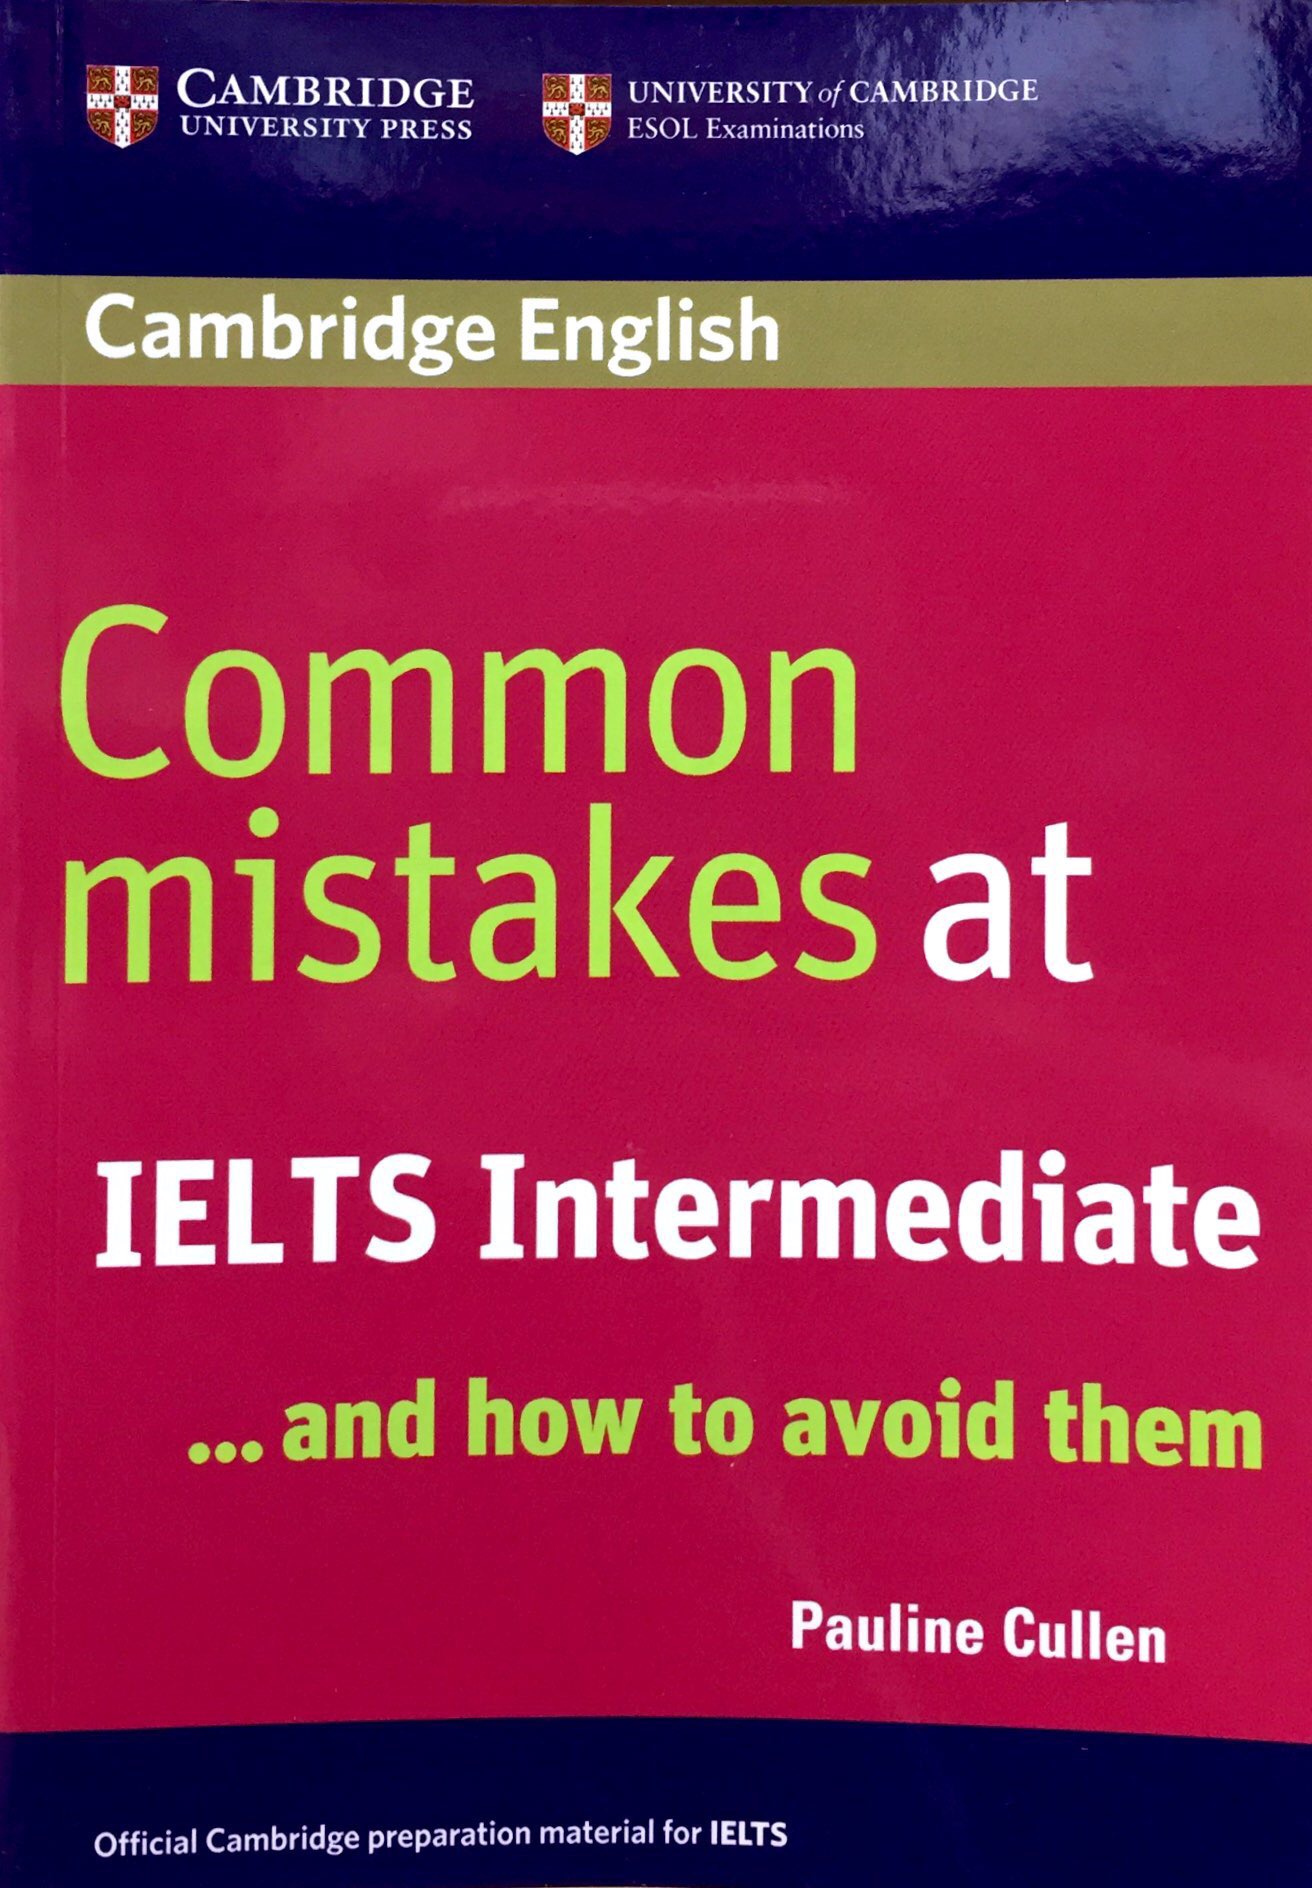 Cambridge Common mistakes at IELTS